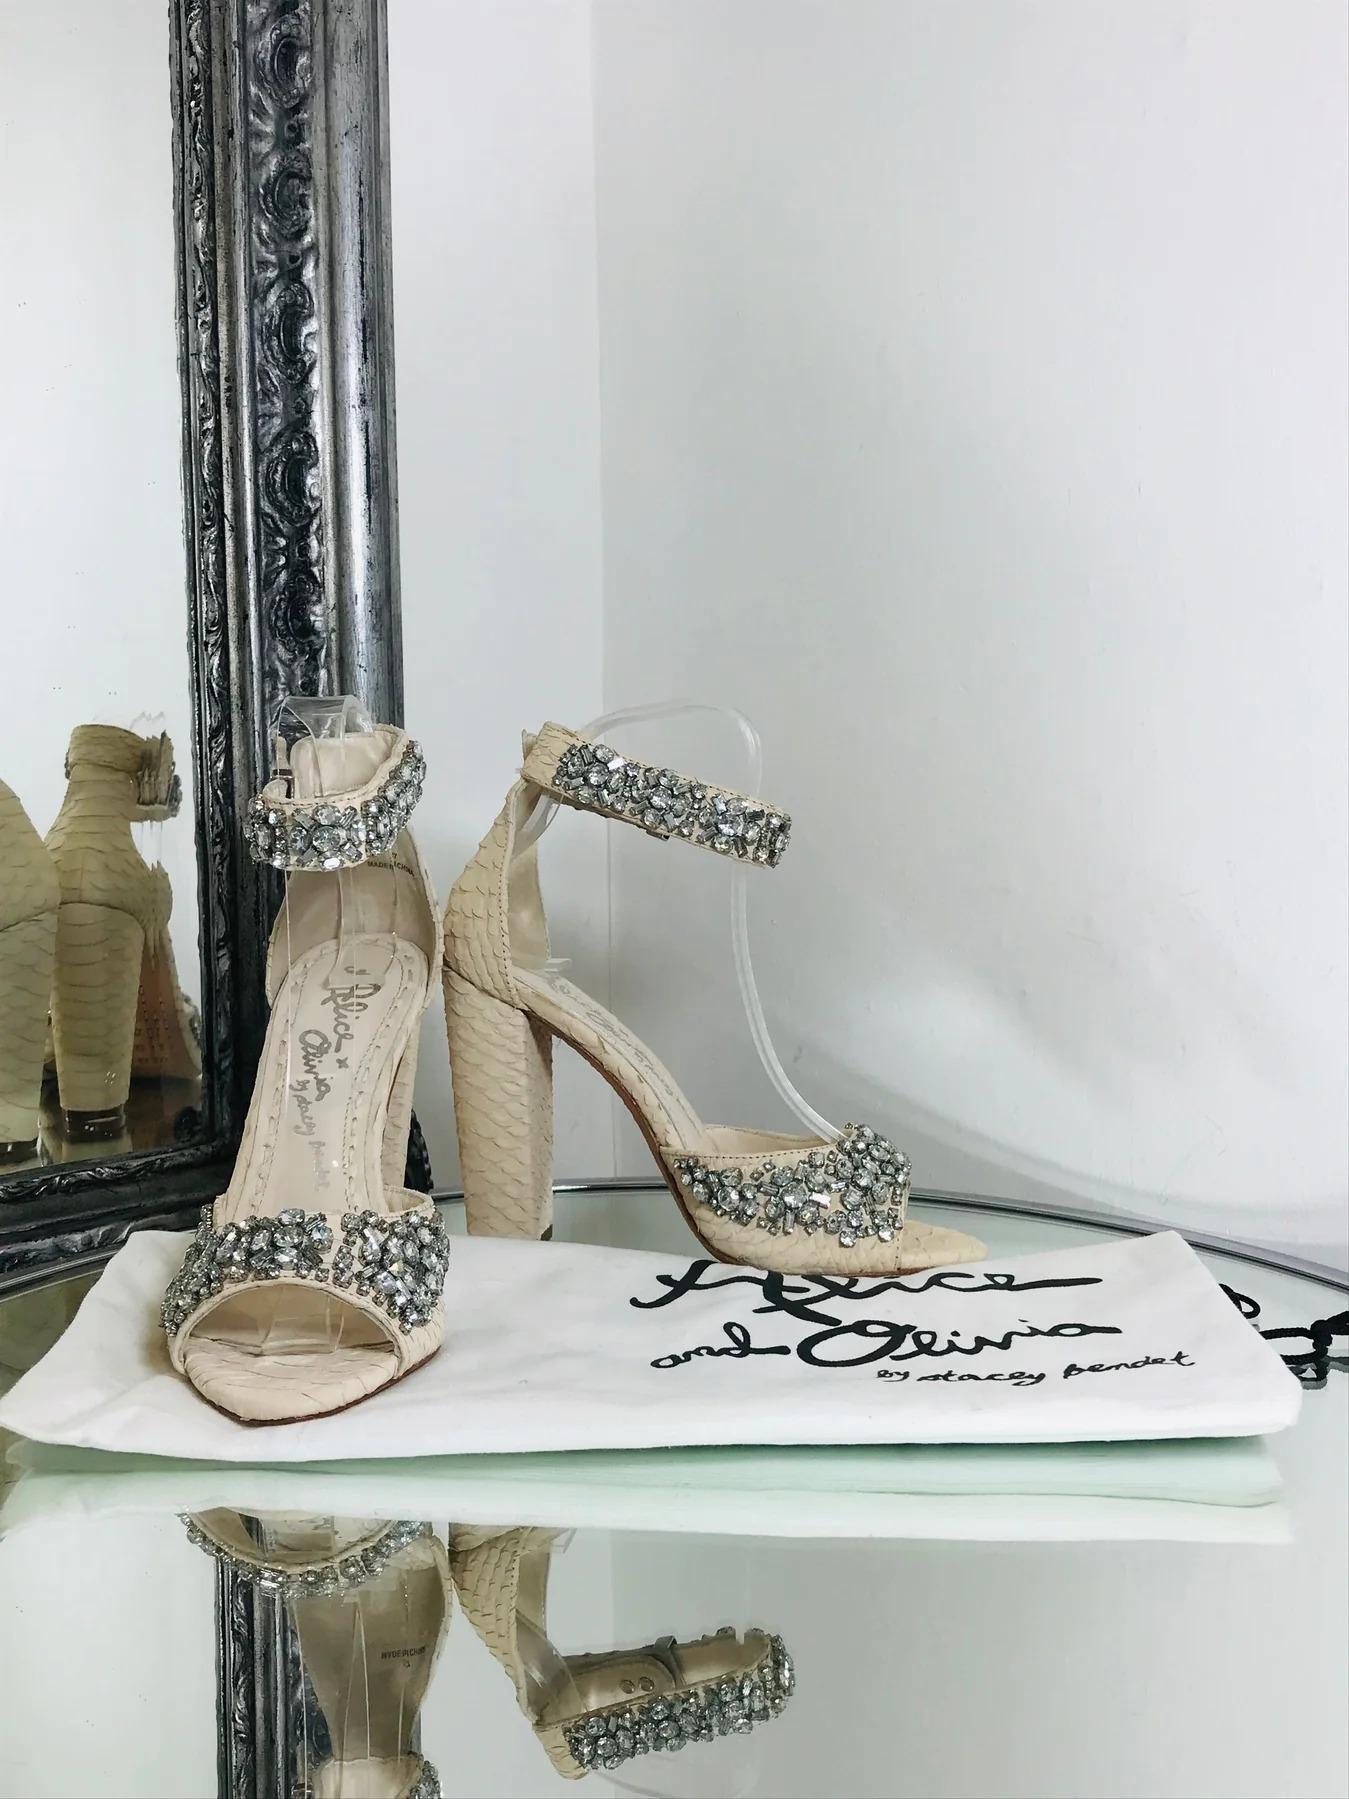 Beautiful Sandals by Alice and Olivia and Stacy Benet

Light beige in colour. Embellished crystal stud accents. Snake embossed leather. Buckle strap with push pin closure. Heel measures approx 11 cm.

Additional information:
Size – 37
Condition –